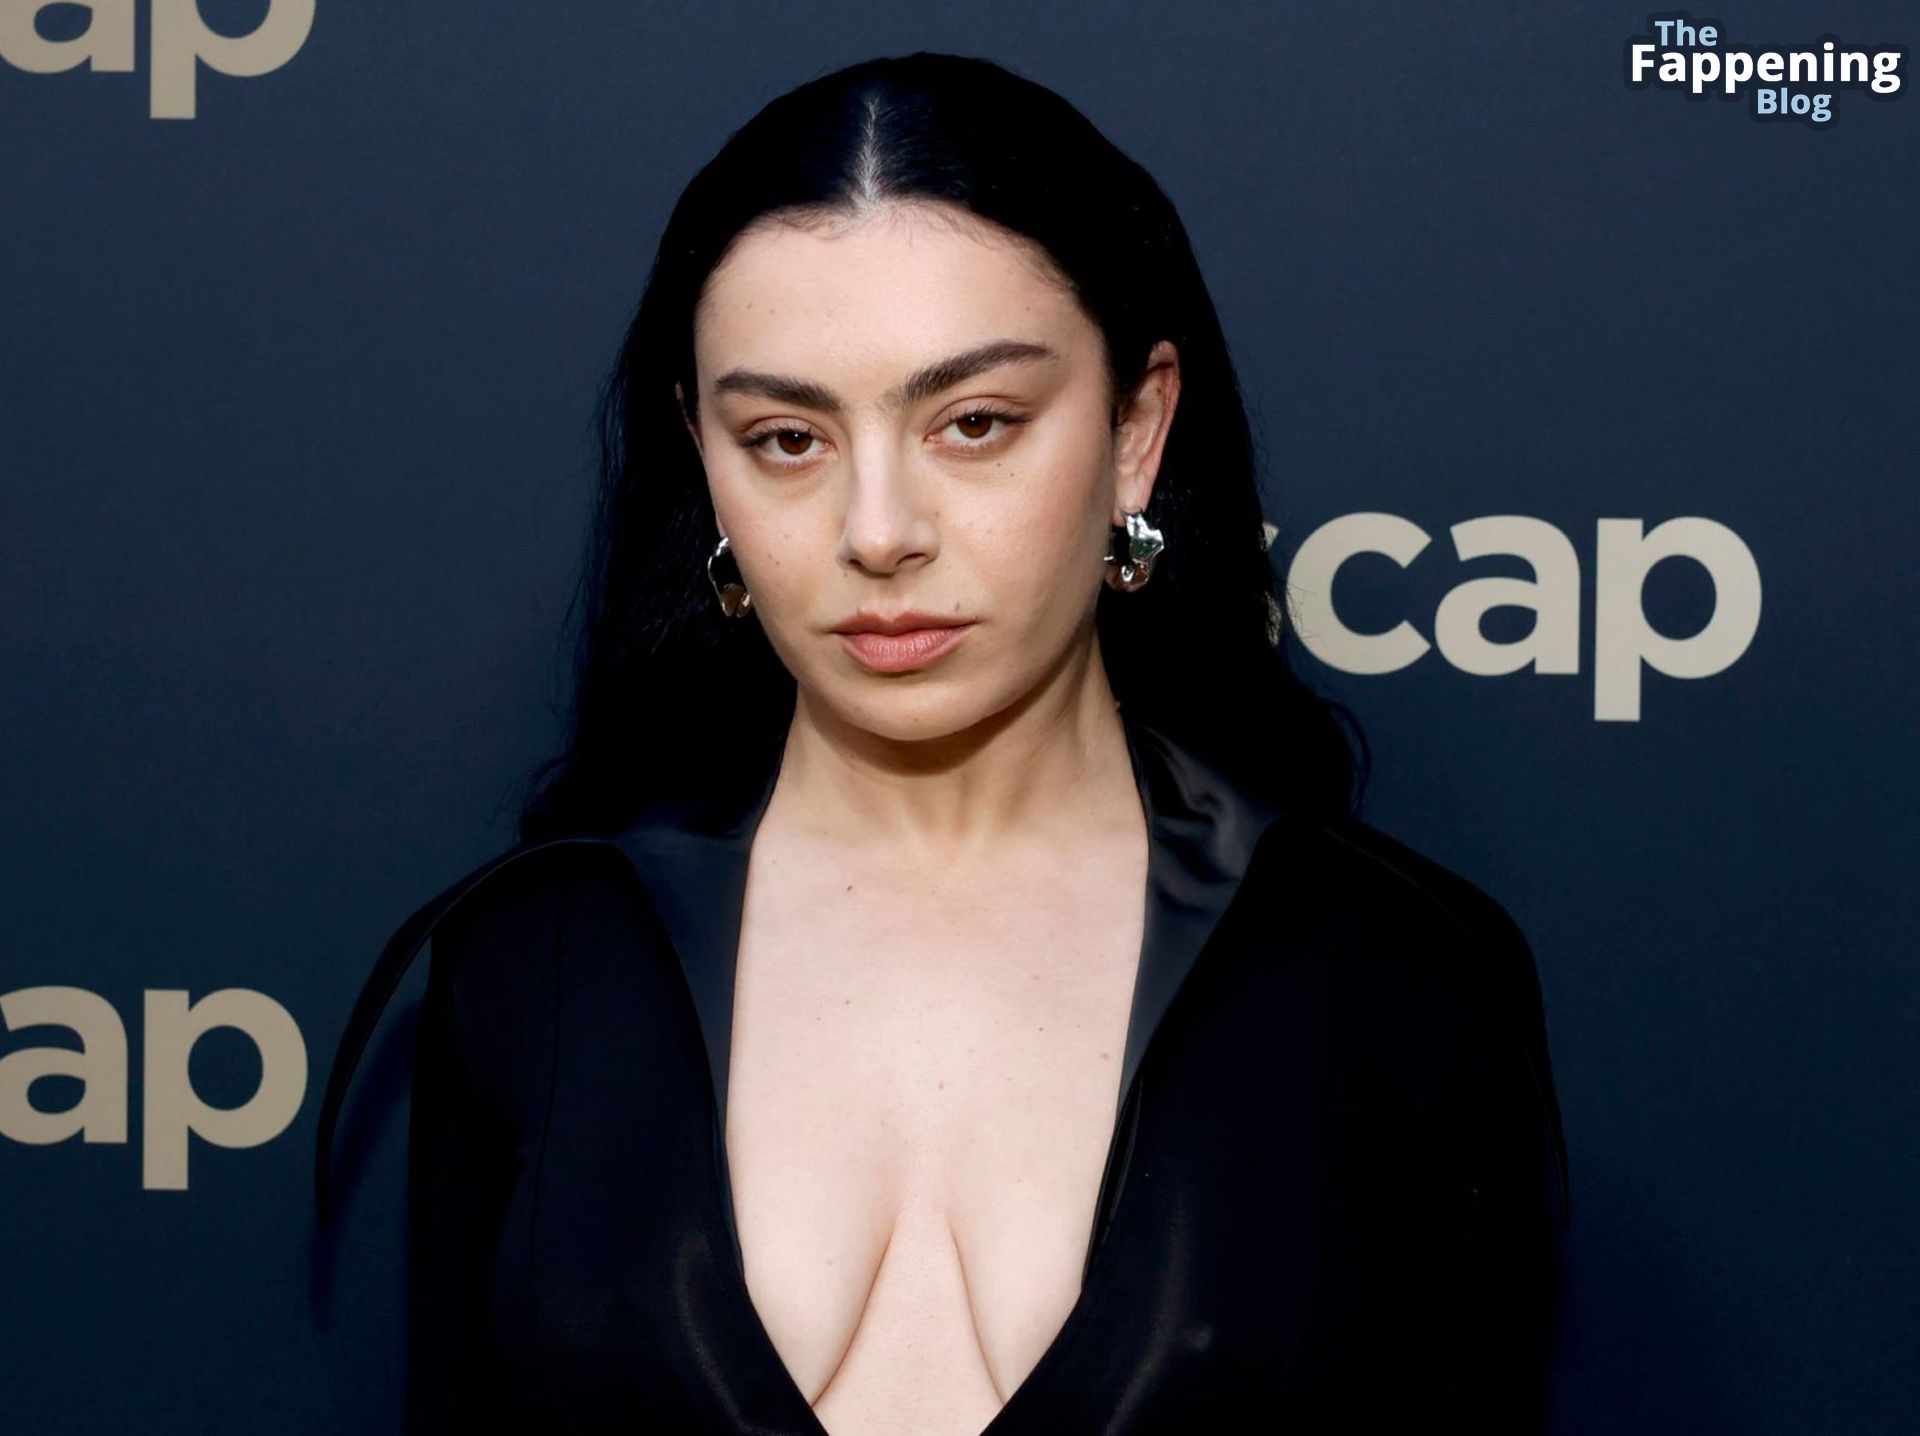 charli-xcx-braless-cleavage-ascap-pop-music-awards-3-thefappeningblog.com_.jpg